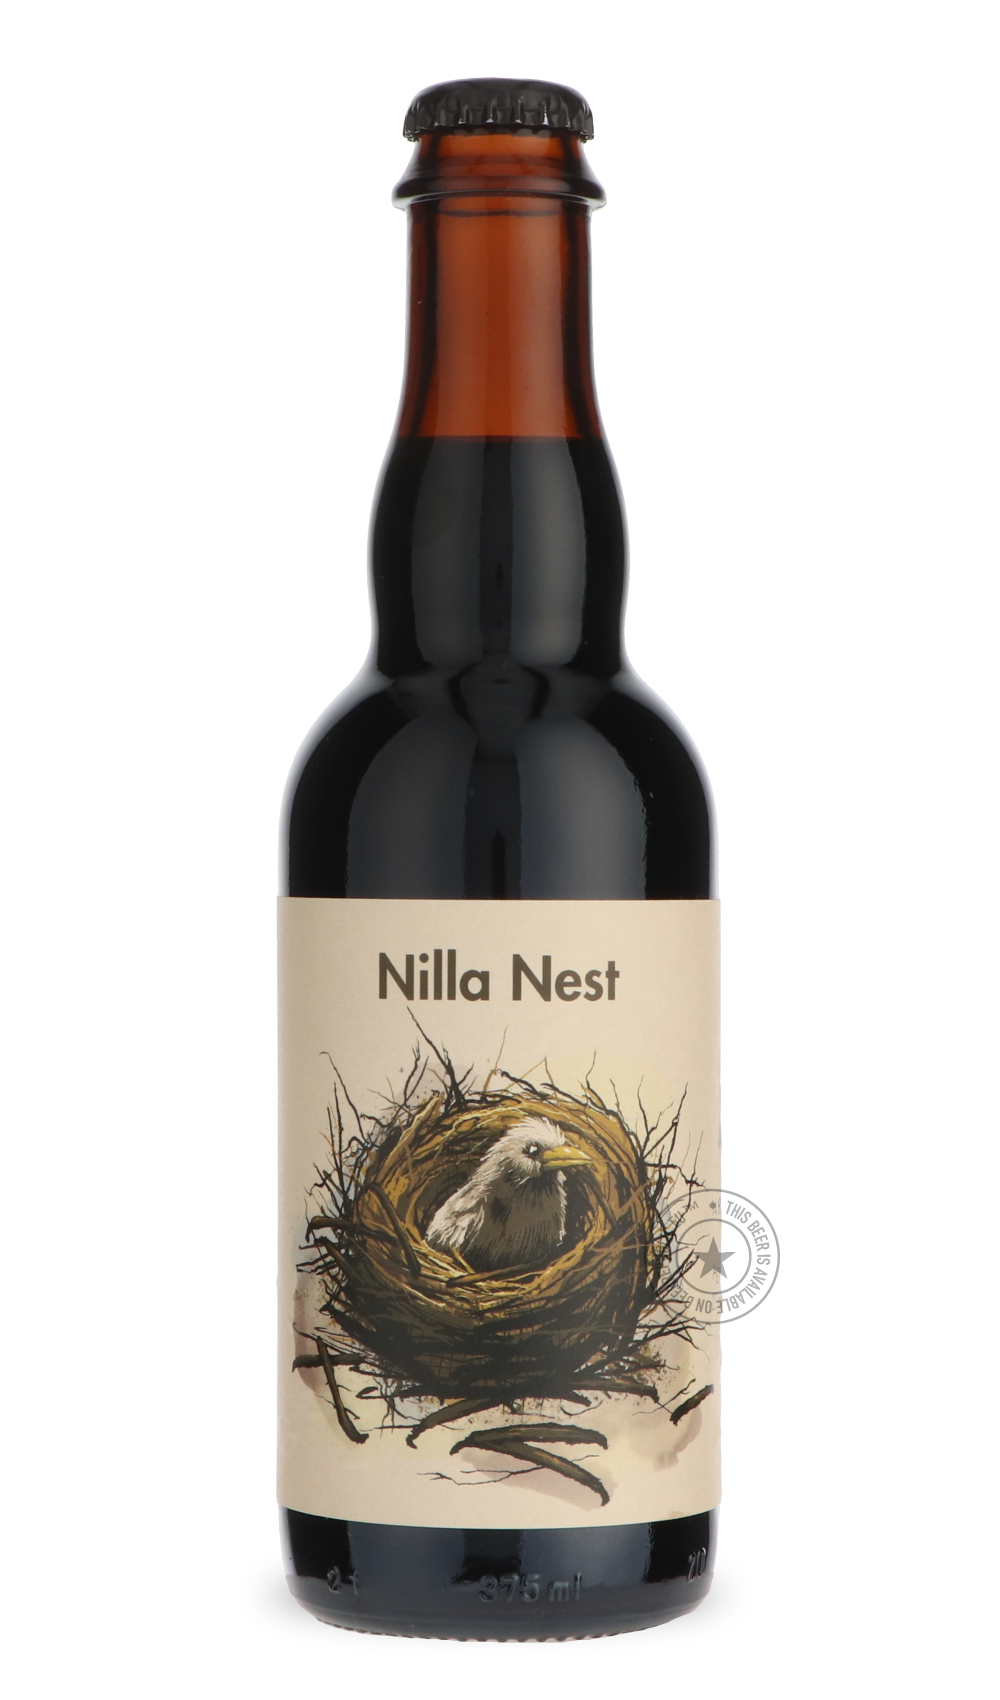 -Cellarmaker- Nilla Nest / Horus Aged-Stout & Porter- Only @ Beer Republic - The best online beer store for American & Canadian craft beer - Buy beer online from the USA and Canada - Bier online kopen - Amerikaans bier kopen - Craft beer store - Craft beer kopen - Amerikanisch bier kaufen - Bier online kaufen - Acheter biere online - IPA - Stout - Porter - New England IPA - Hazy IPA - Imperial Stout - Barrel Aged - Barrel Aged Imperial Stout - Brown - Dark beer - Blond - Blonde - Pilsner - Lager - Wheat - W